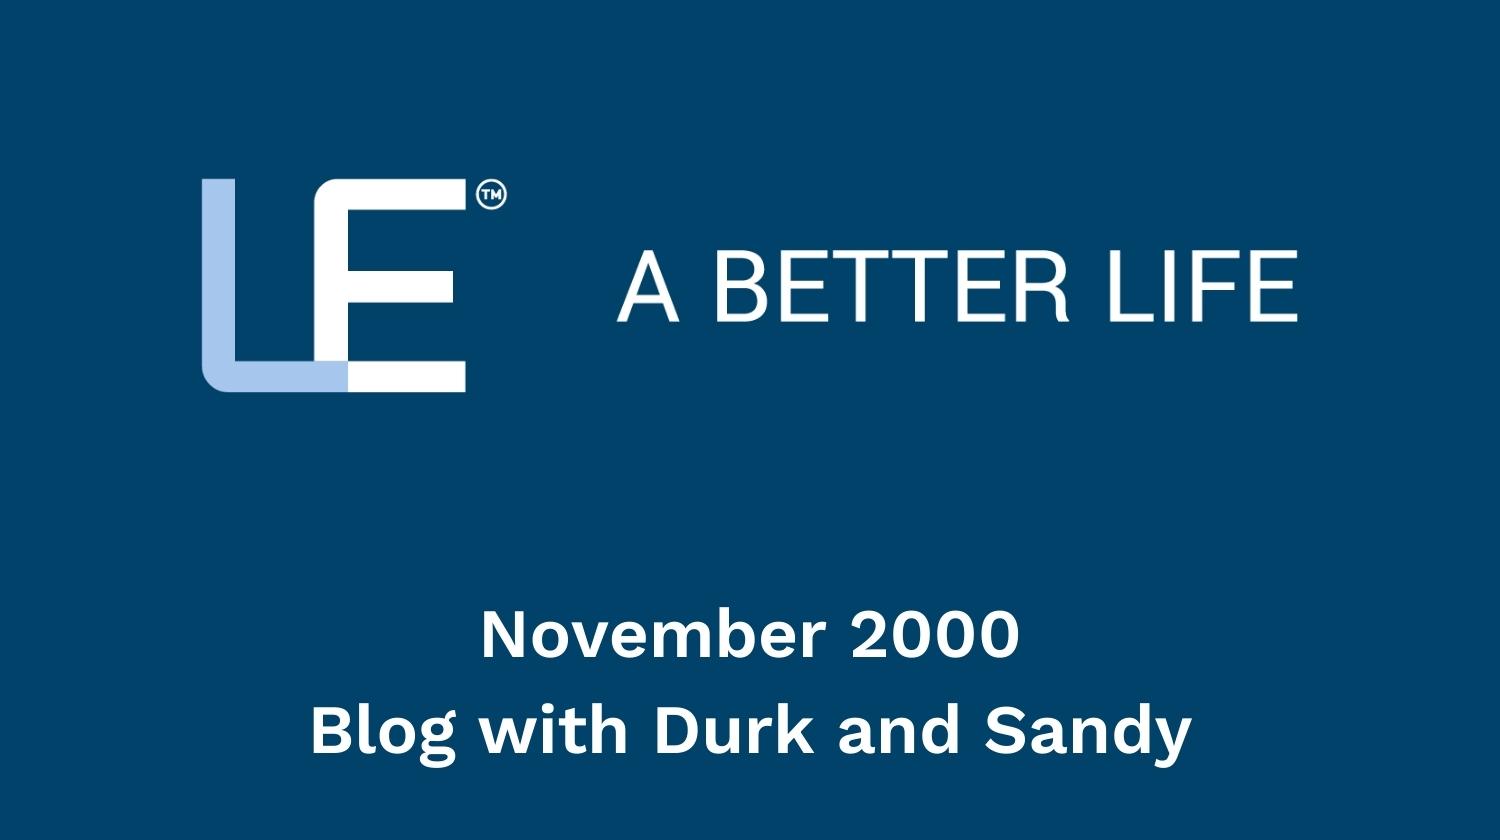 November 2000 Blog with Durk and Sandy